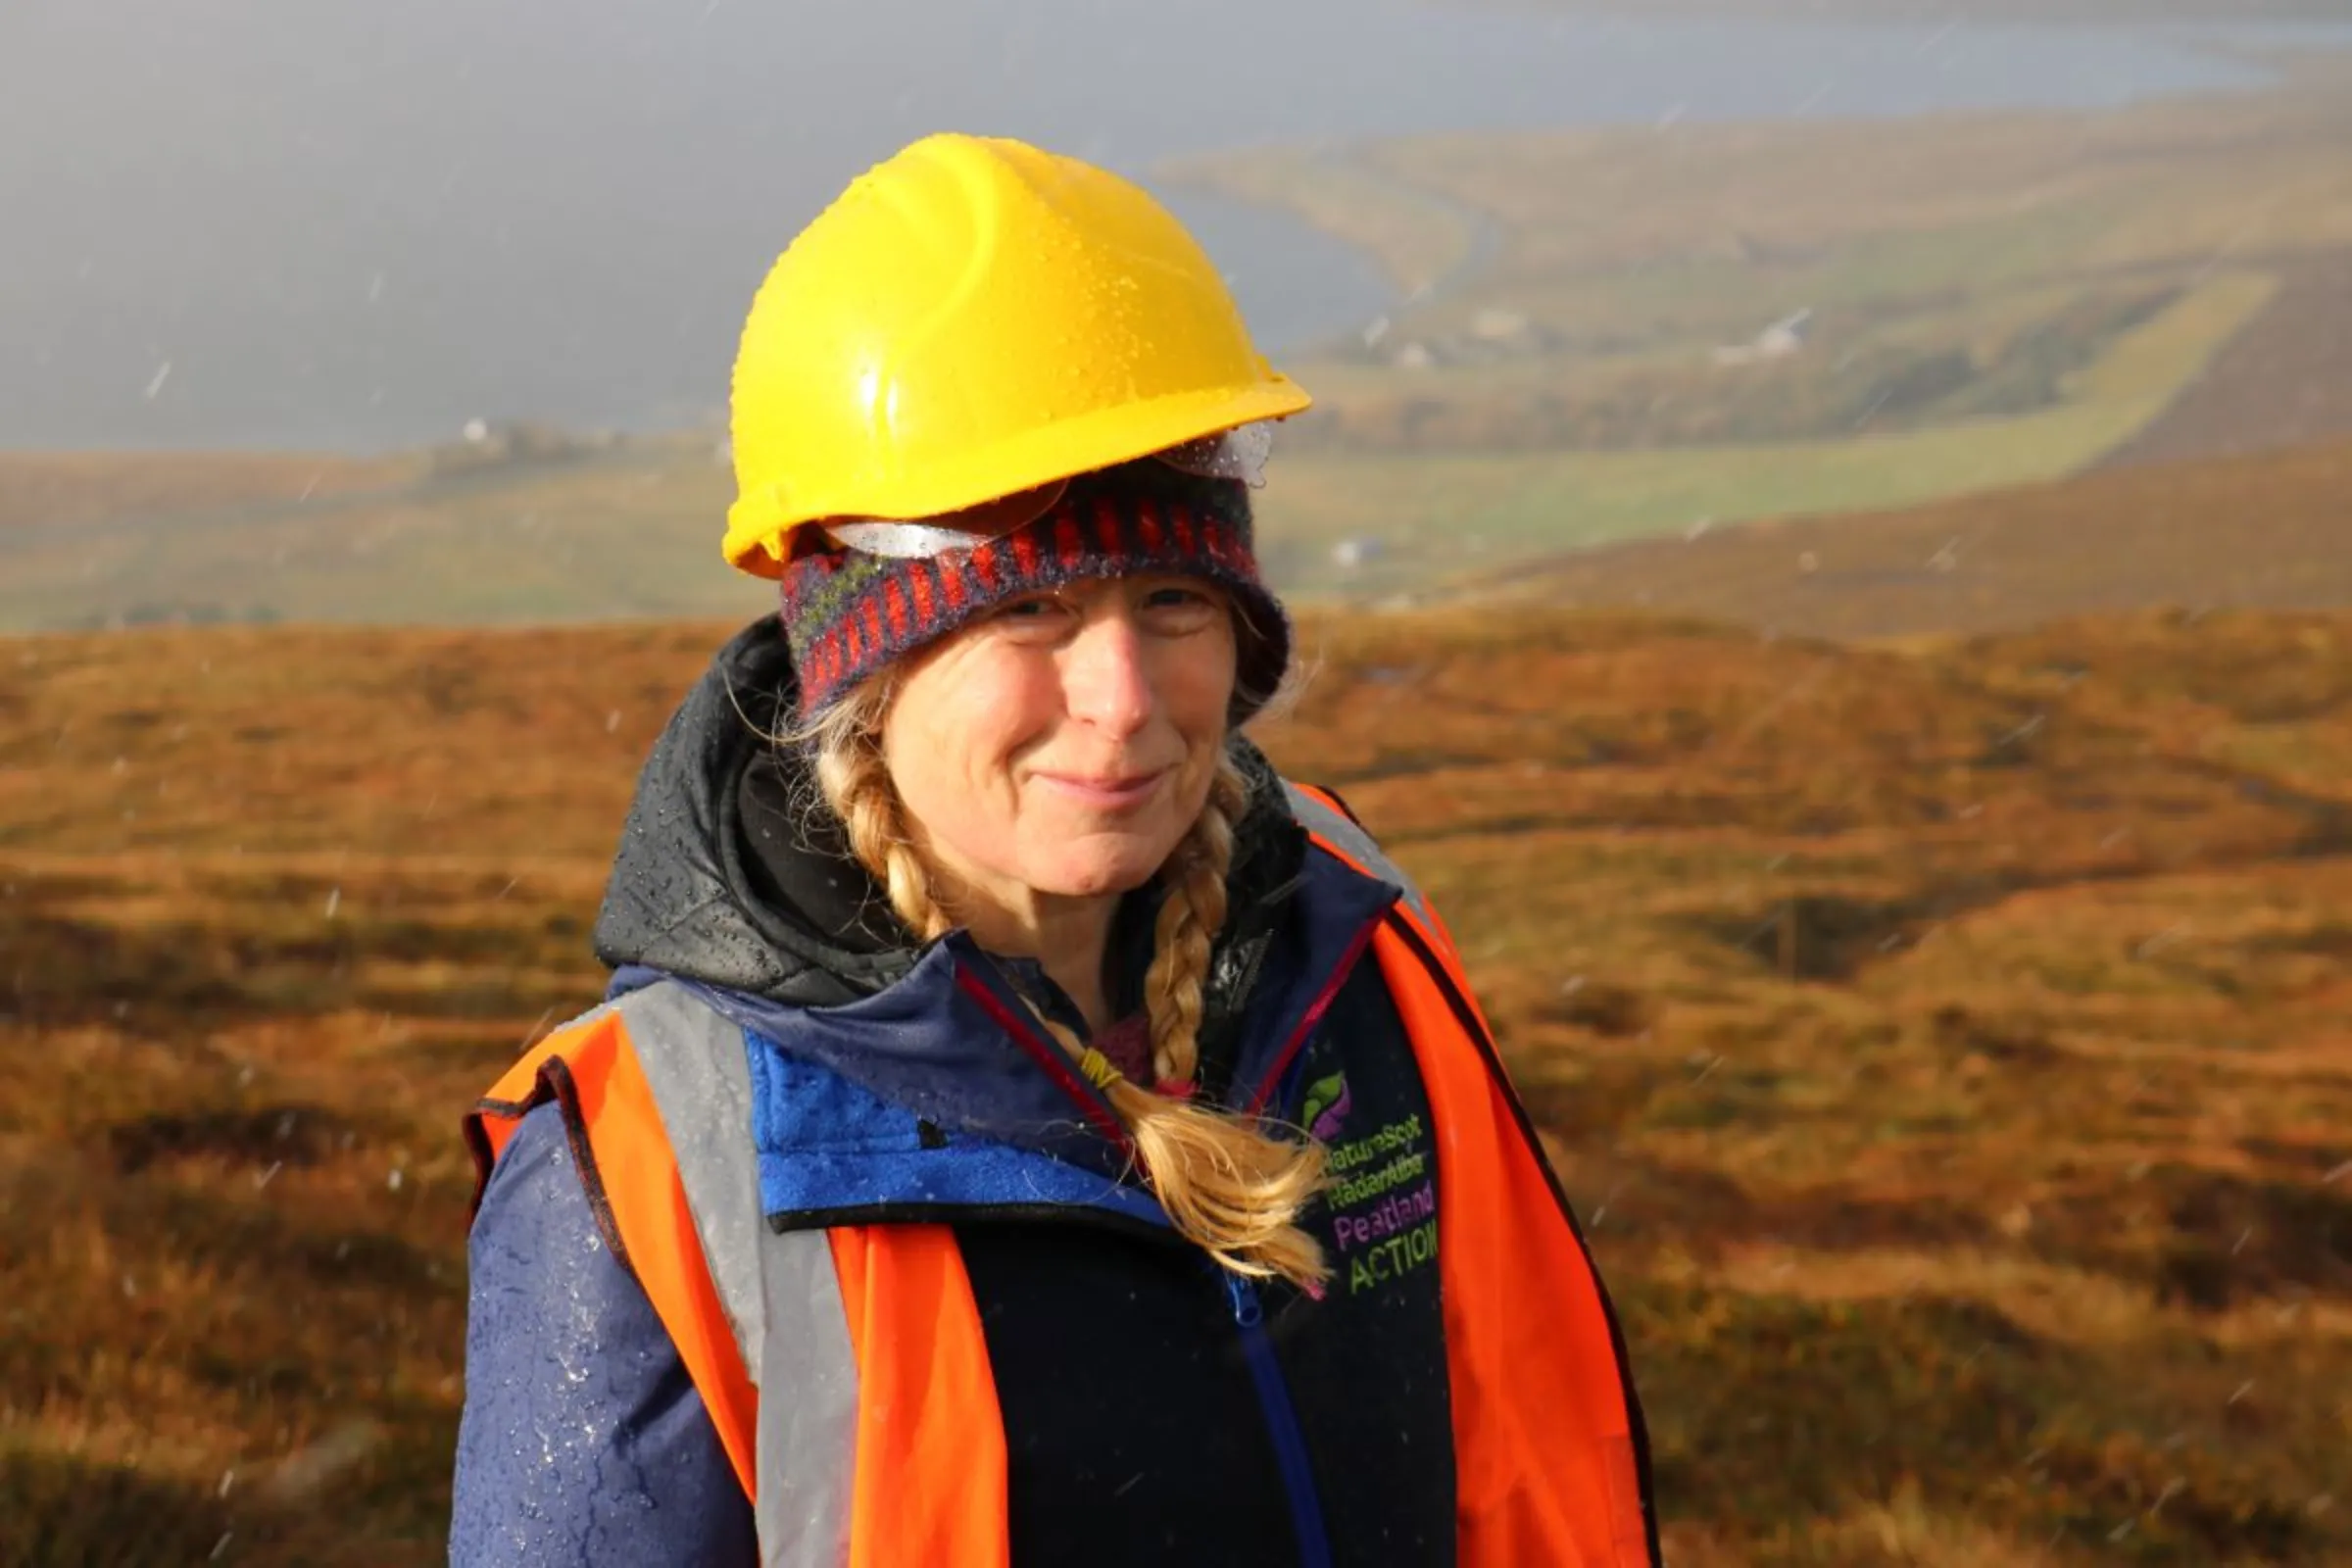 Sue White, Peatland ACTION project officer at the Shetland Amenity Trust, got into peatland restoration after her house was flooded by a peat slide 11 years ago, pictured here on a restoration site on Mainland island near Tresta hamlet, Shetland, Scotland, November 1, 2023. Thomson Reuters Foundation/Jack Graham